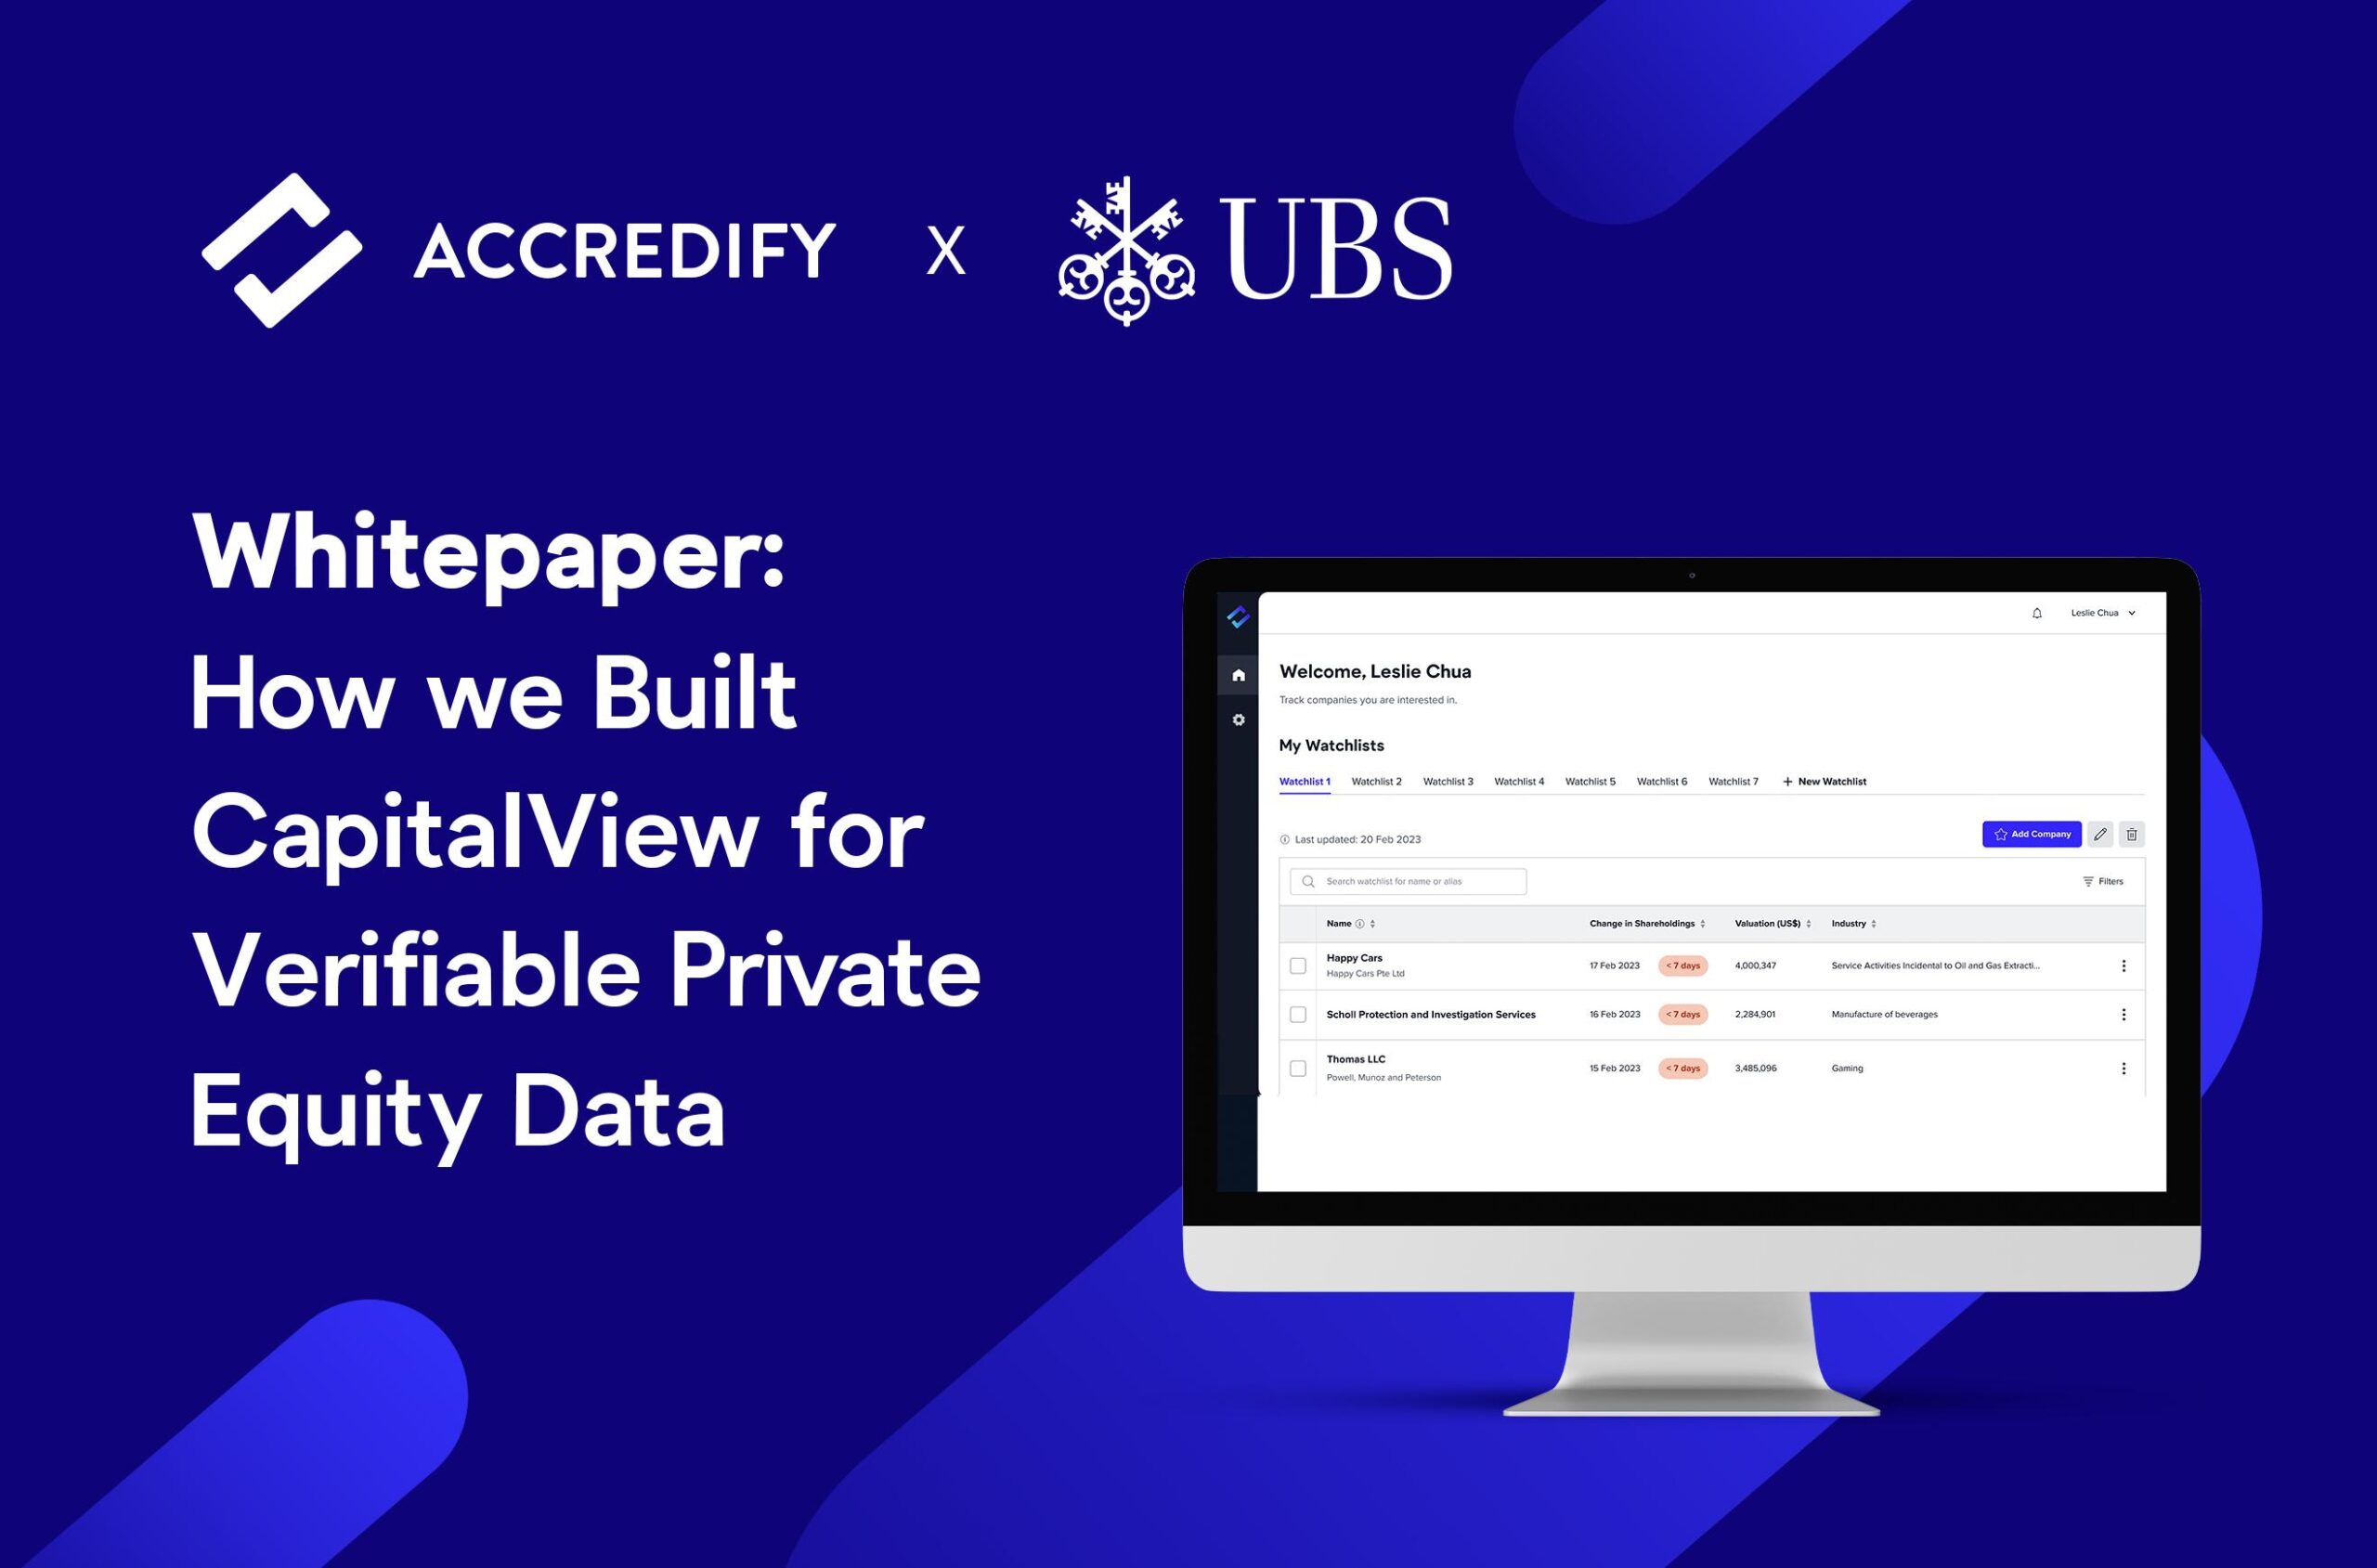 Whitepaper: How we Built CapitalView for Verifiable Private Equity Data